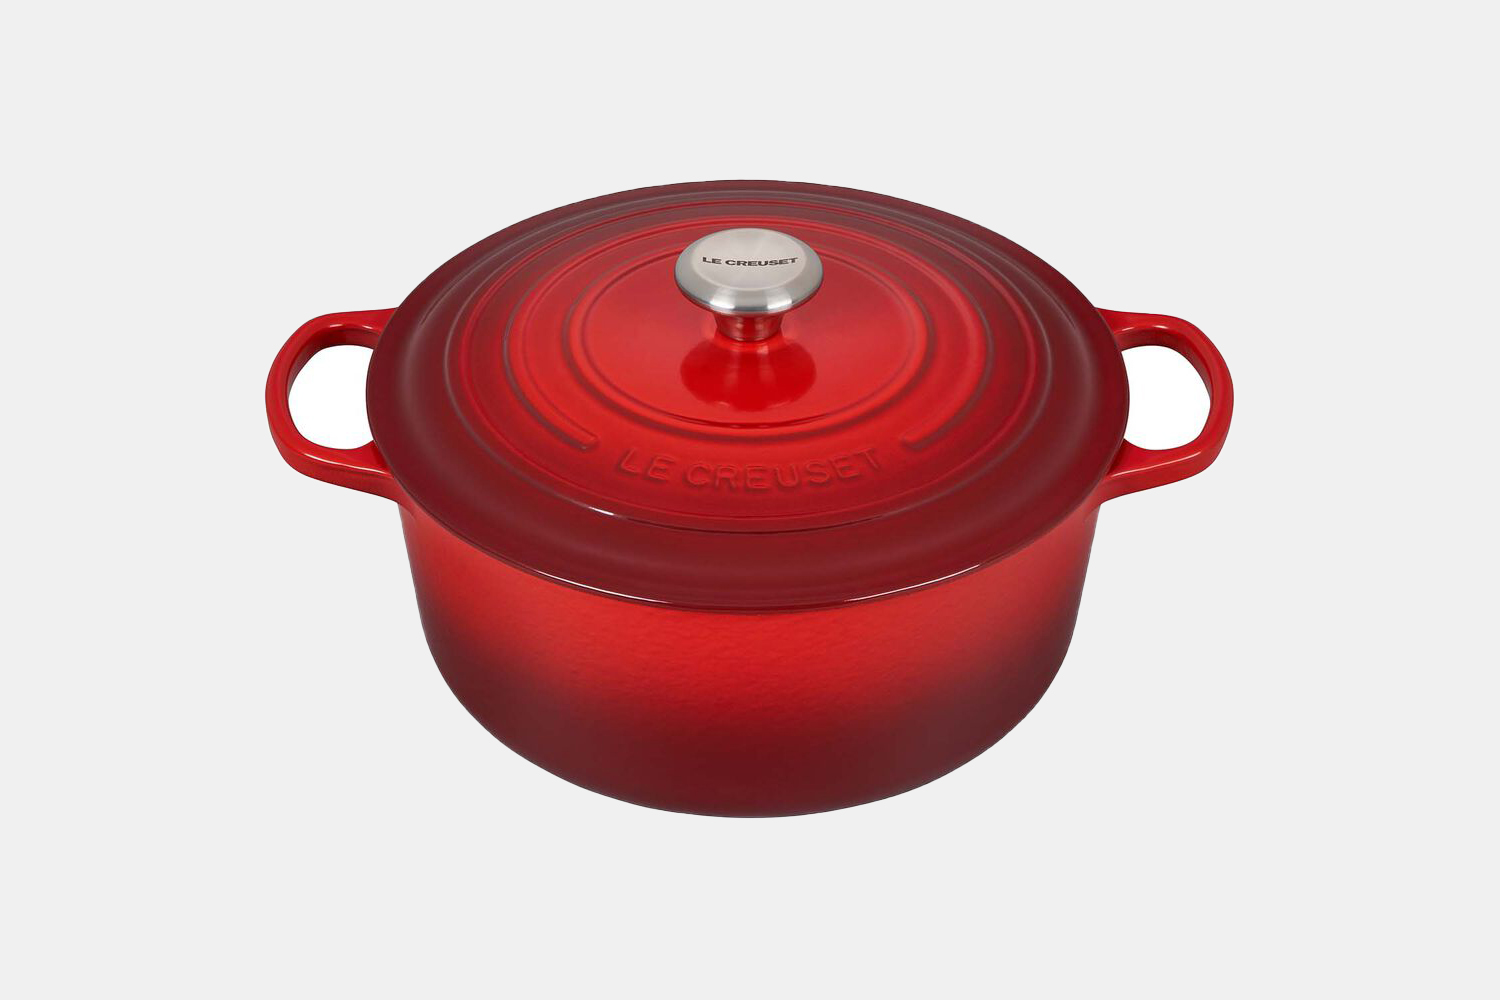 A red dutch oven